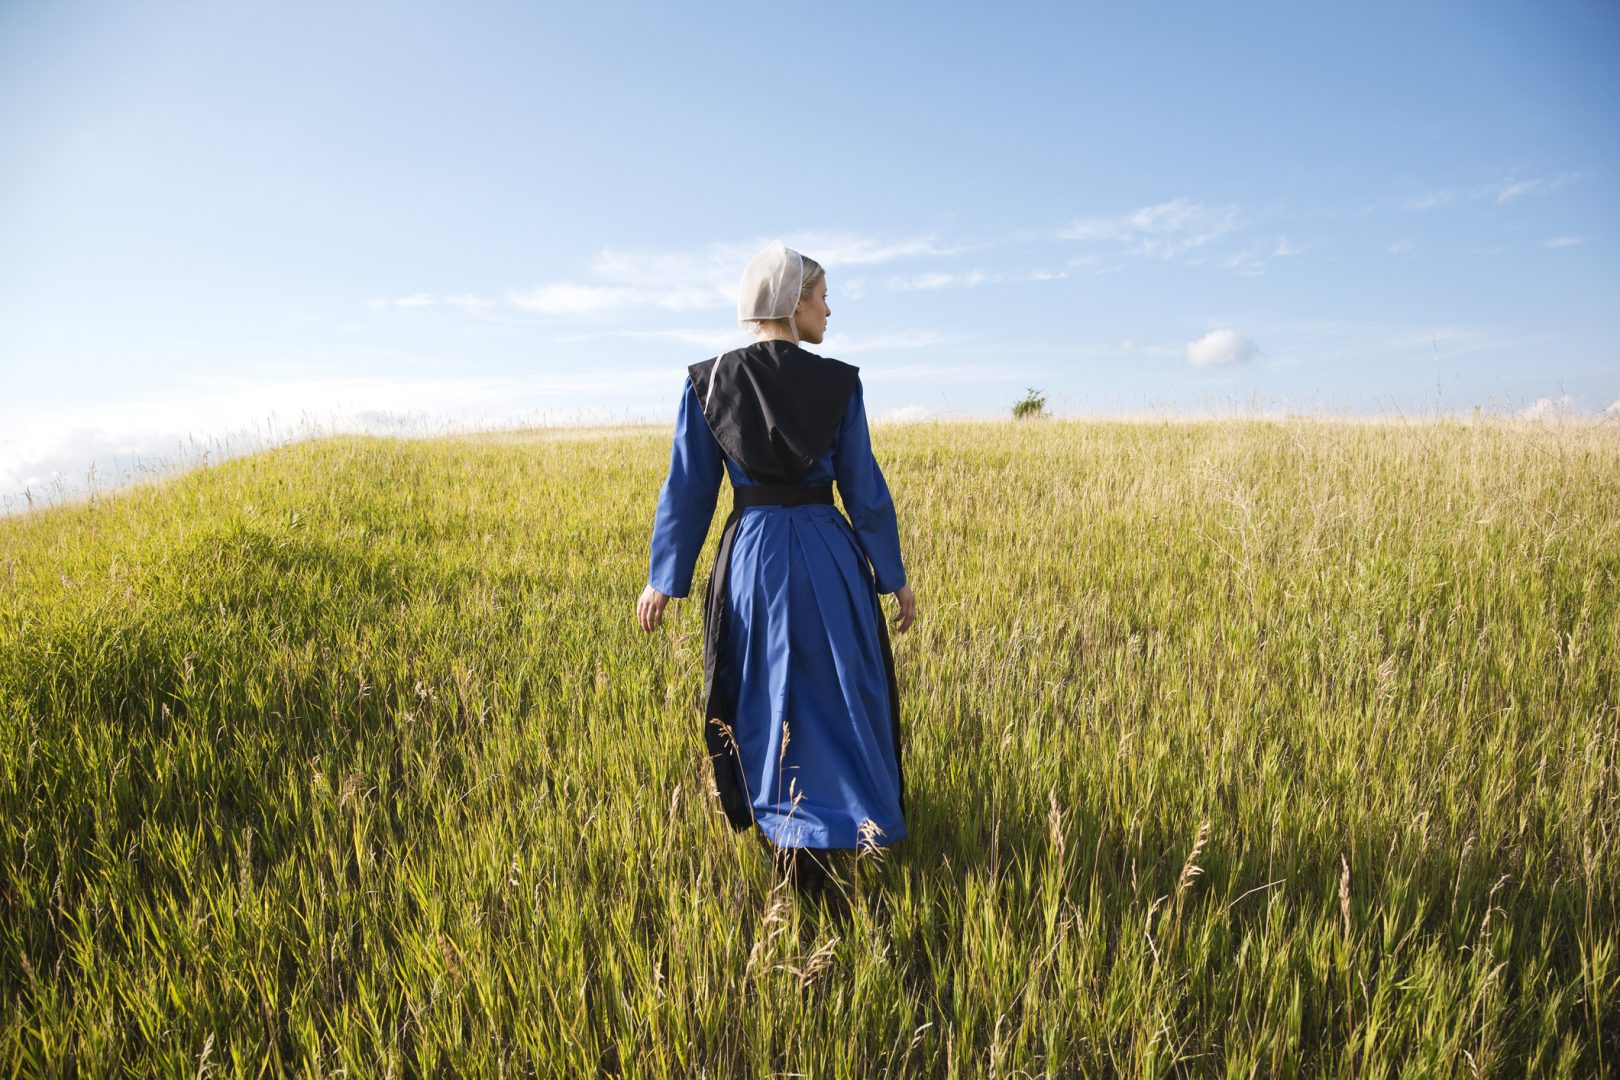 An Old Order Amish woman in a blue dress and black cape and apron walks in a grassy field on a sunny afternoon